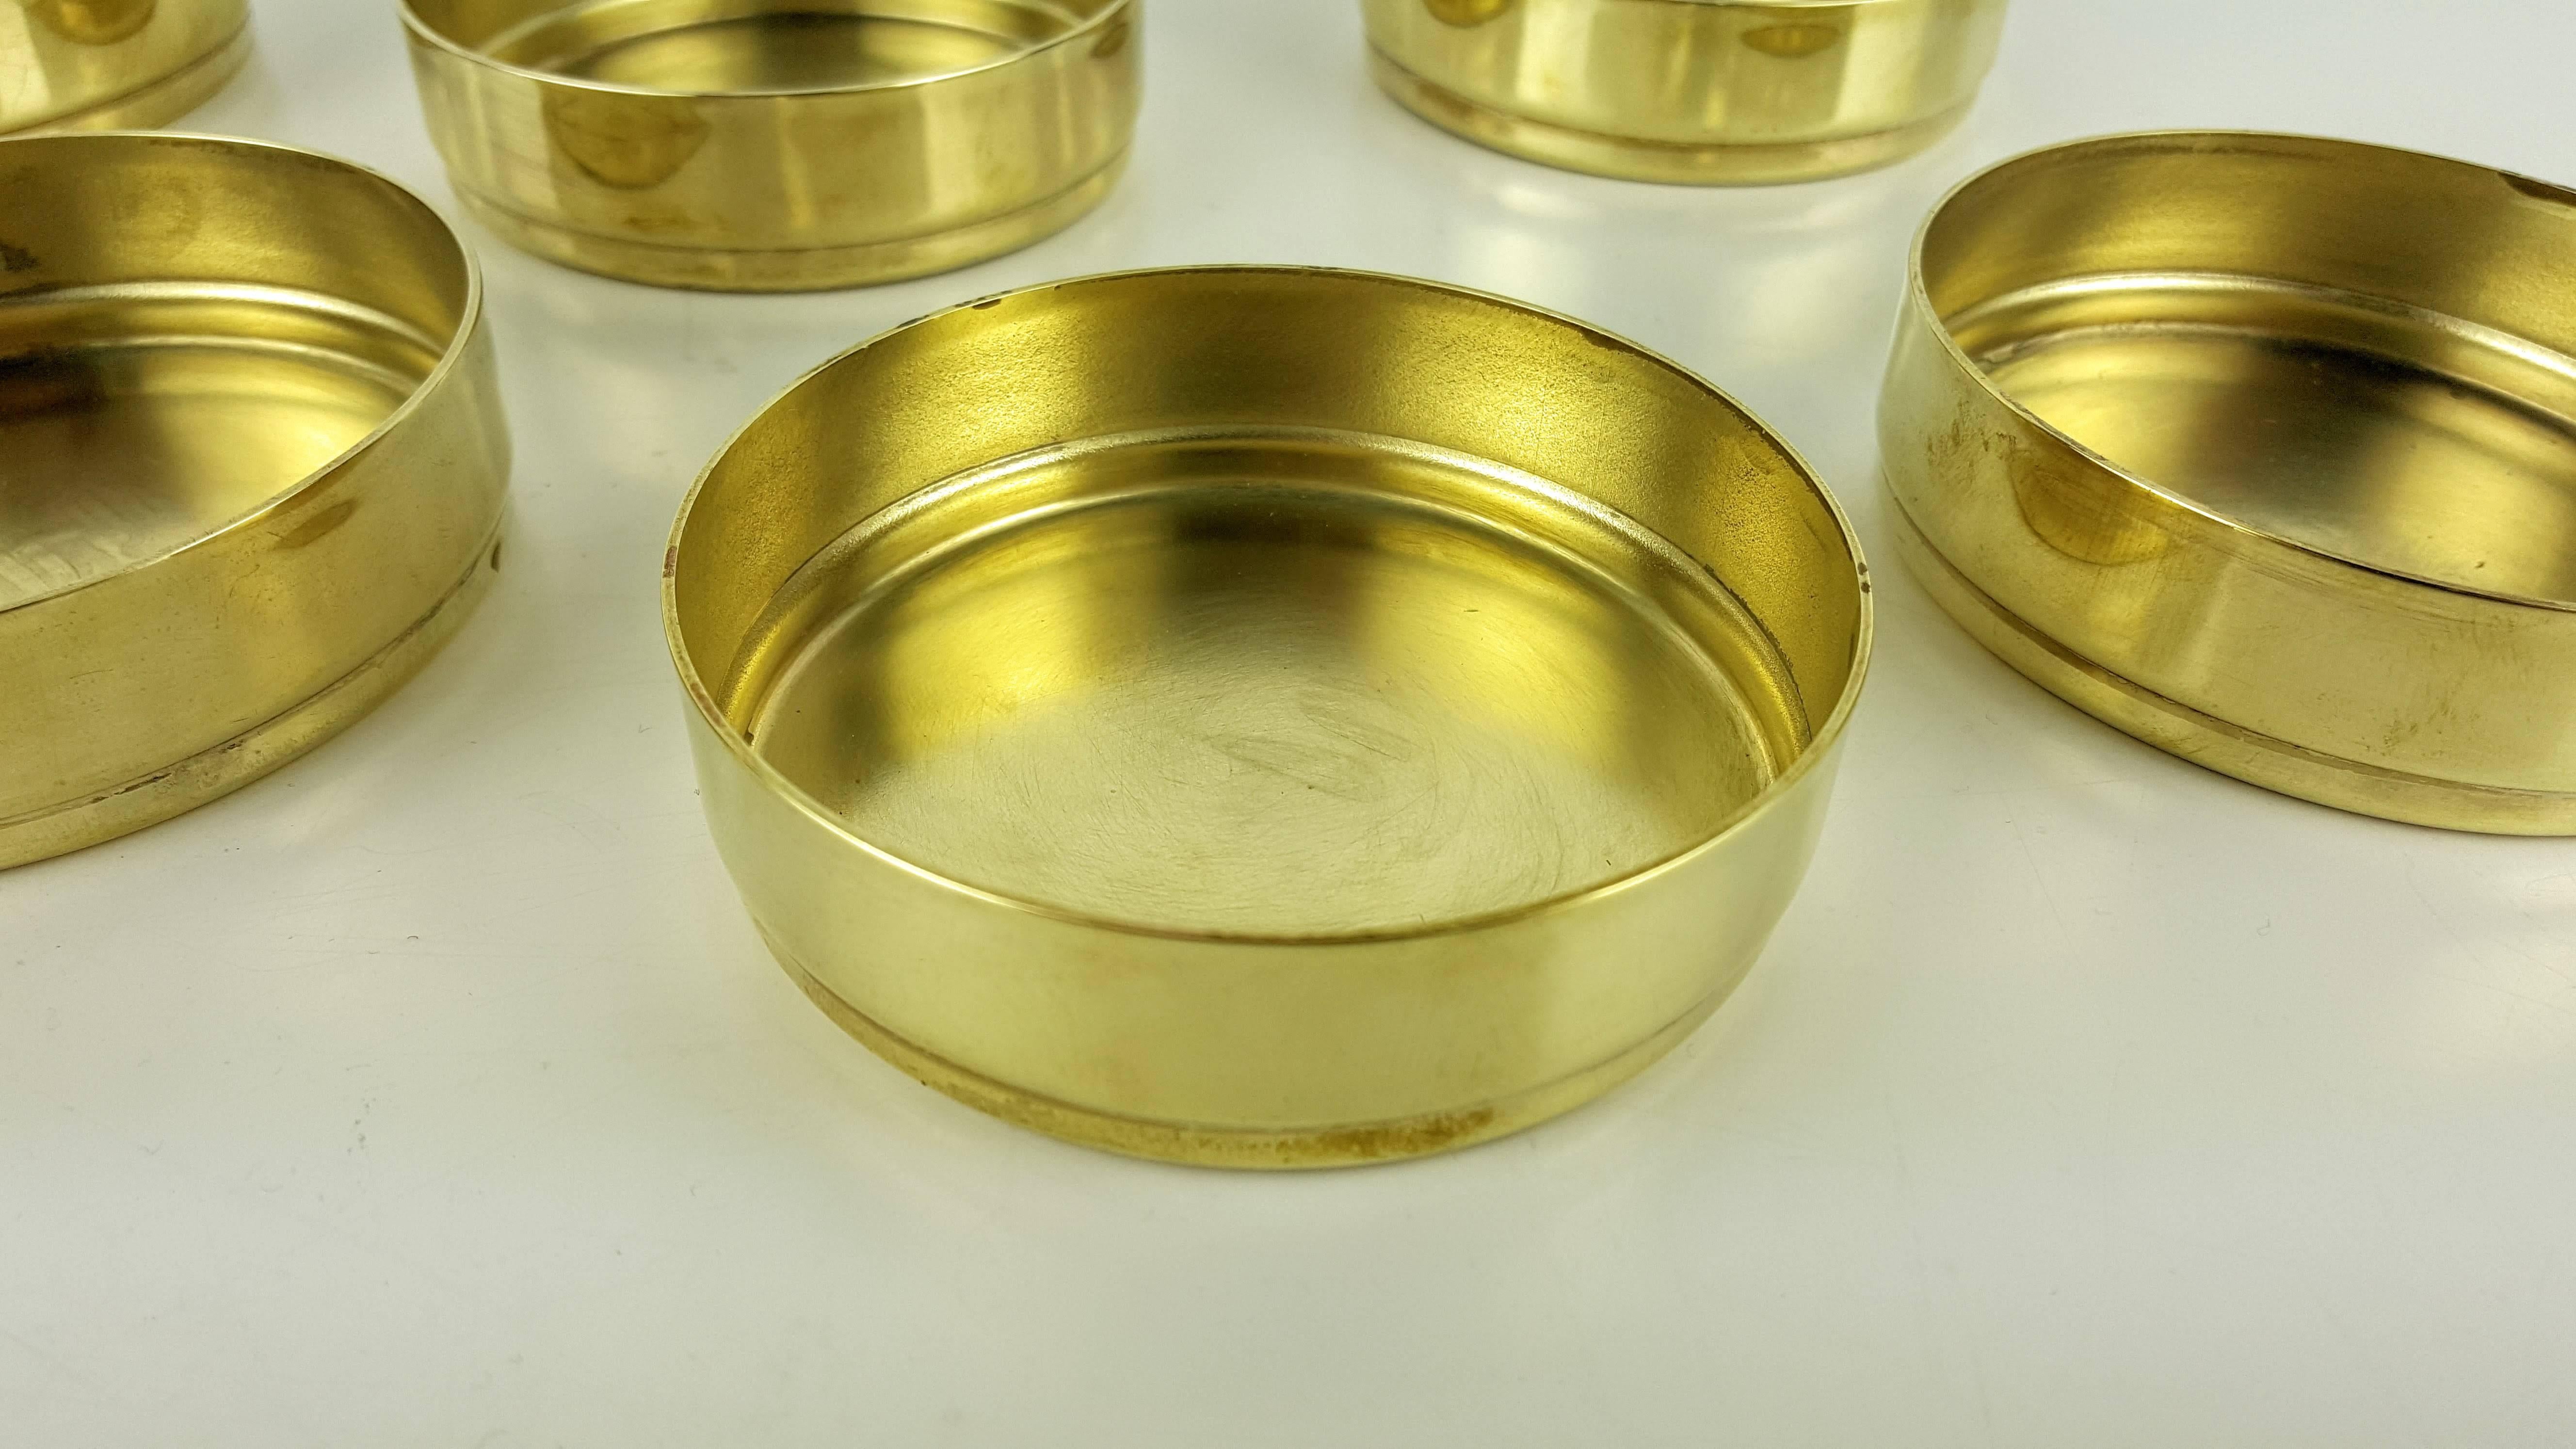 American Rare Set of Brass Drink Coasters by Tommi Parzinger for Dorlyn, 1950s